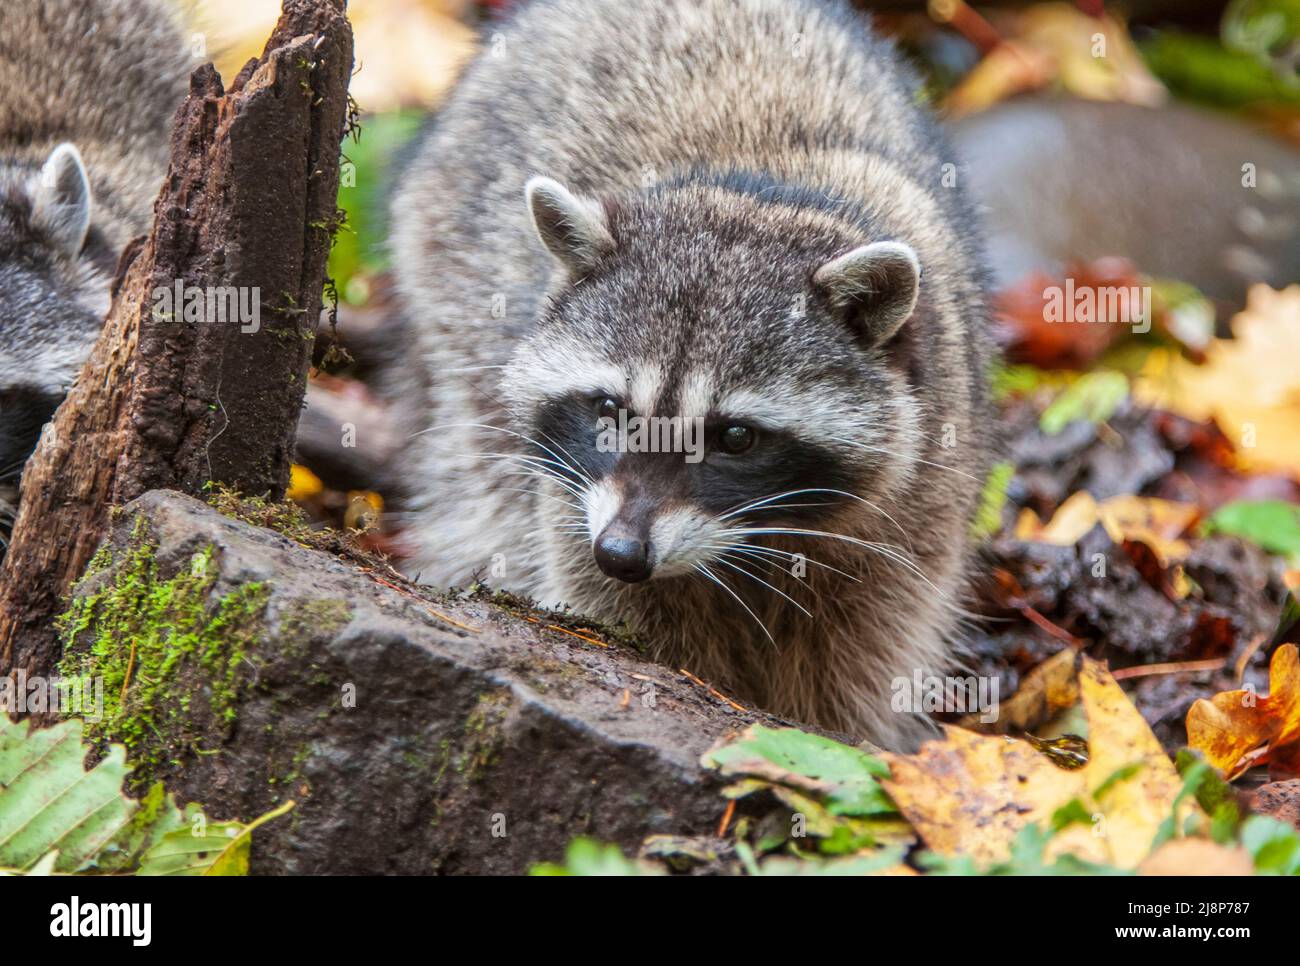 Closeup image of an adult raccoon (Procyon lotor) in damp autumn leaves in the Pacific Northwest, United States. Stock Photo